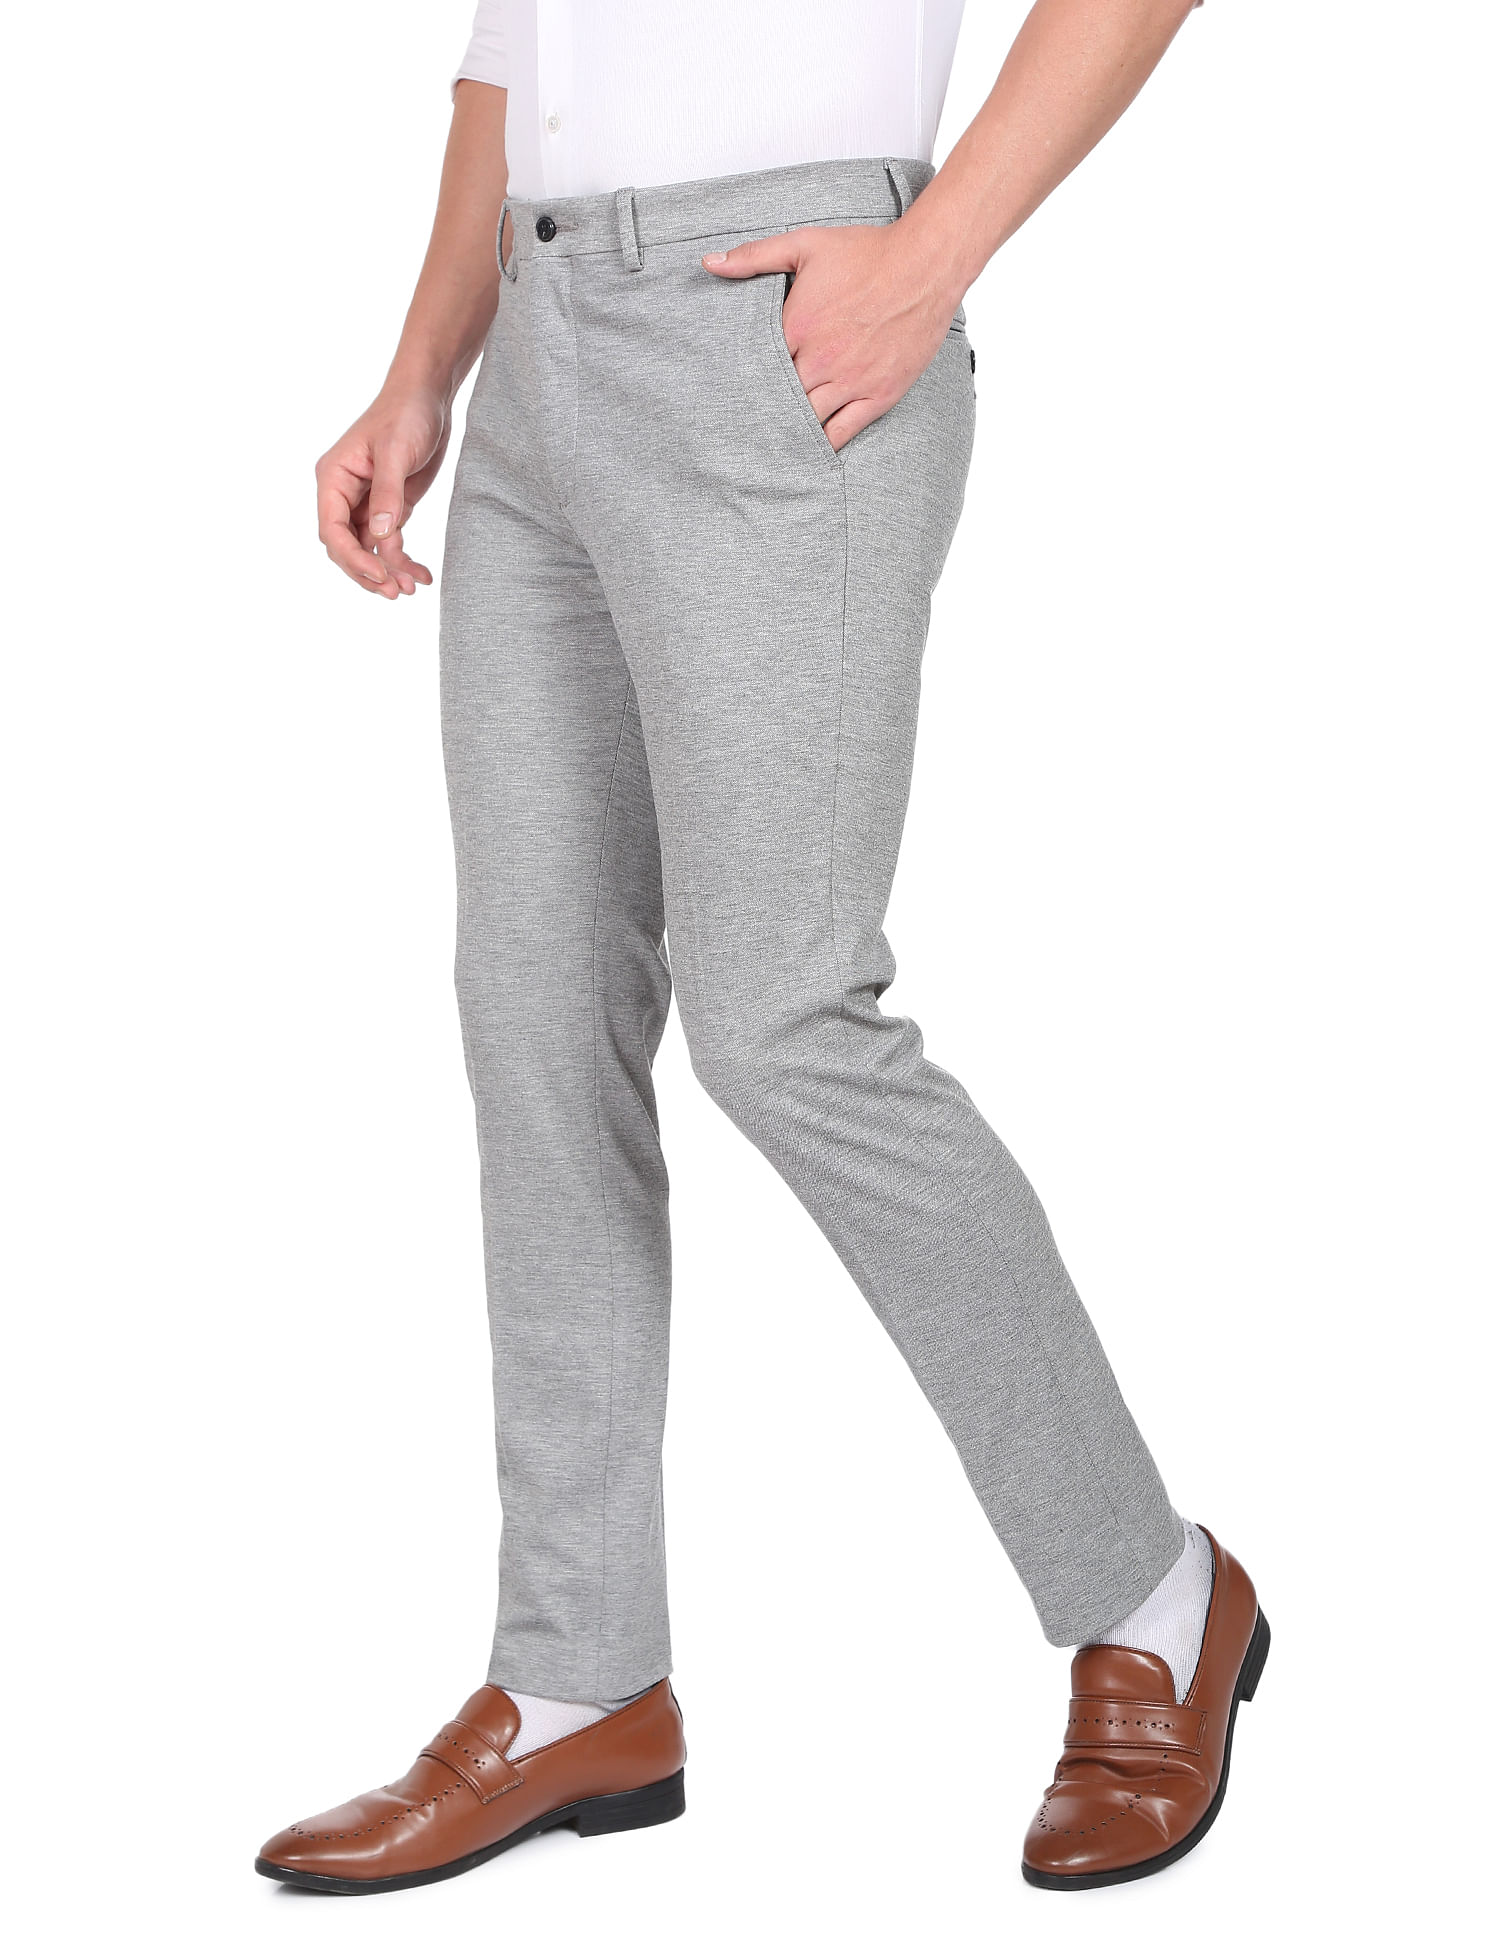 Women Ready-to-Wear | Taupe grey alpaca Roxy suit trousers | Barbara Bui  Official Online Store